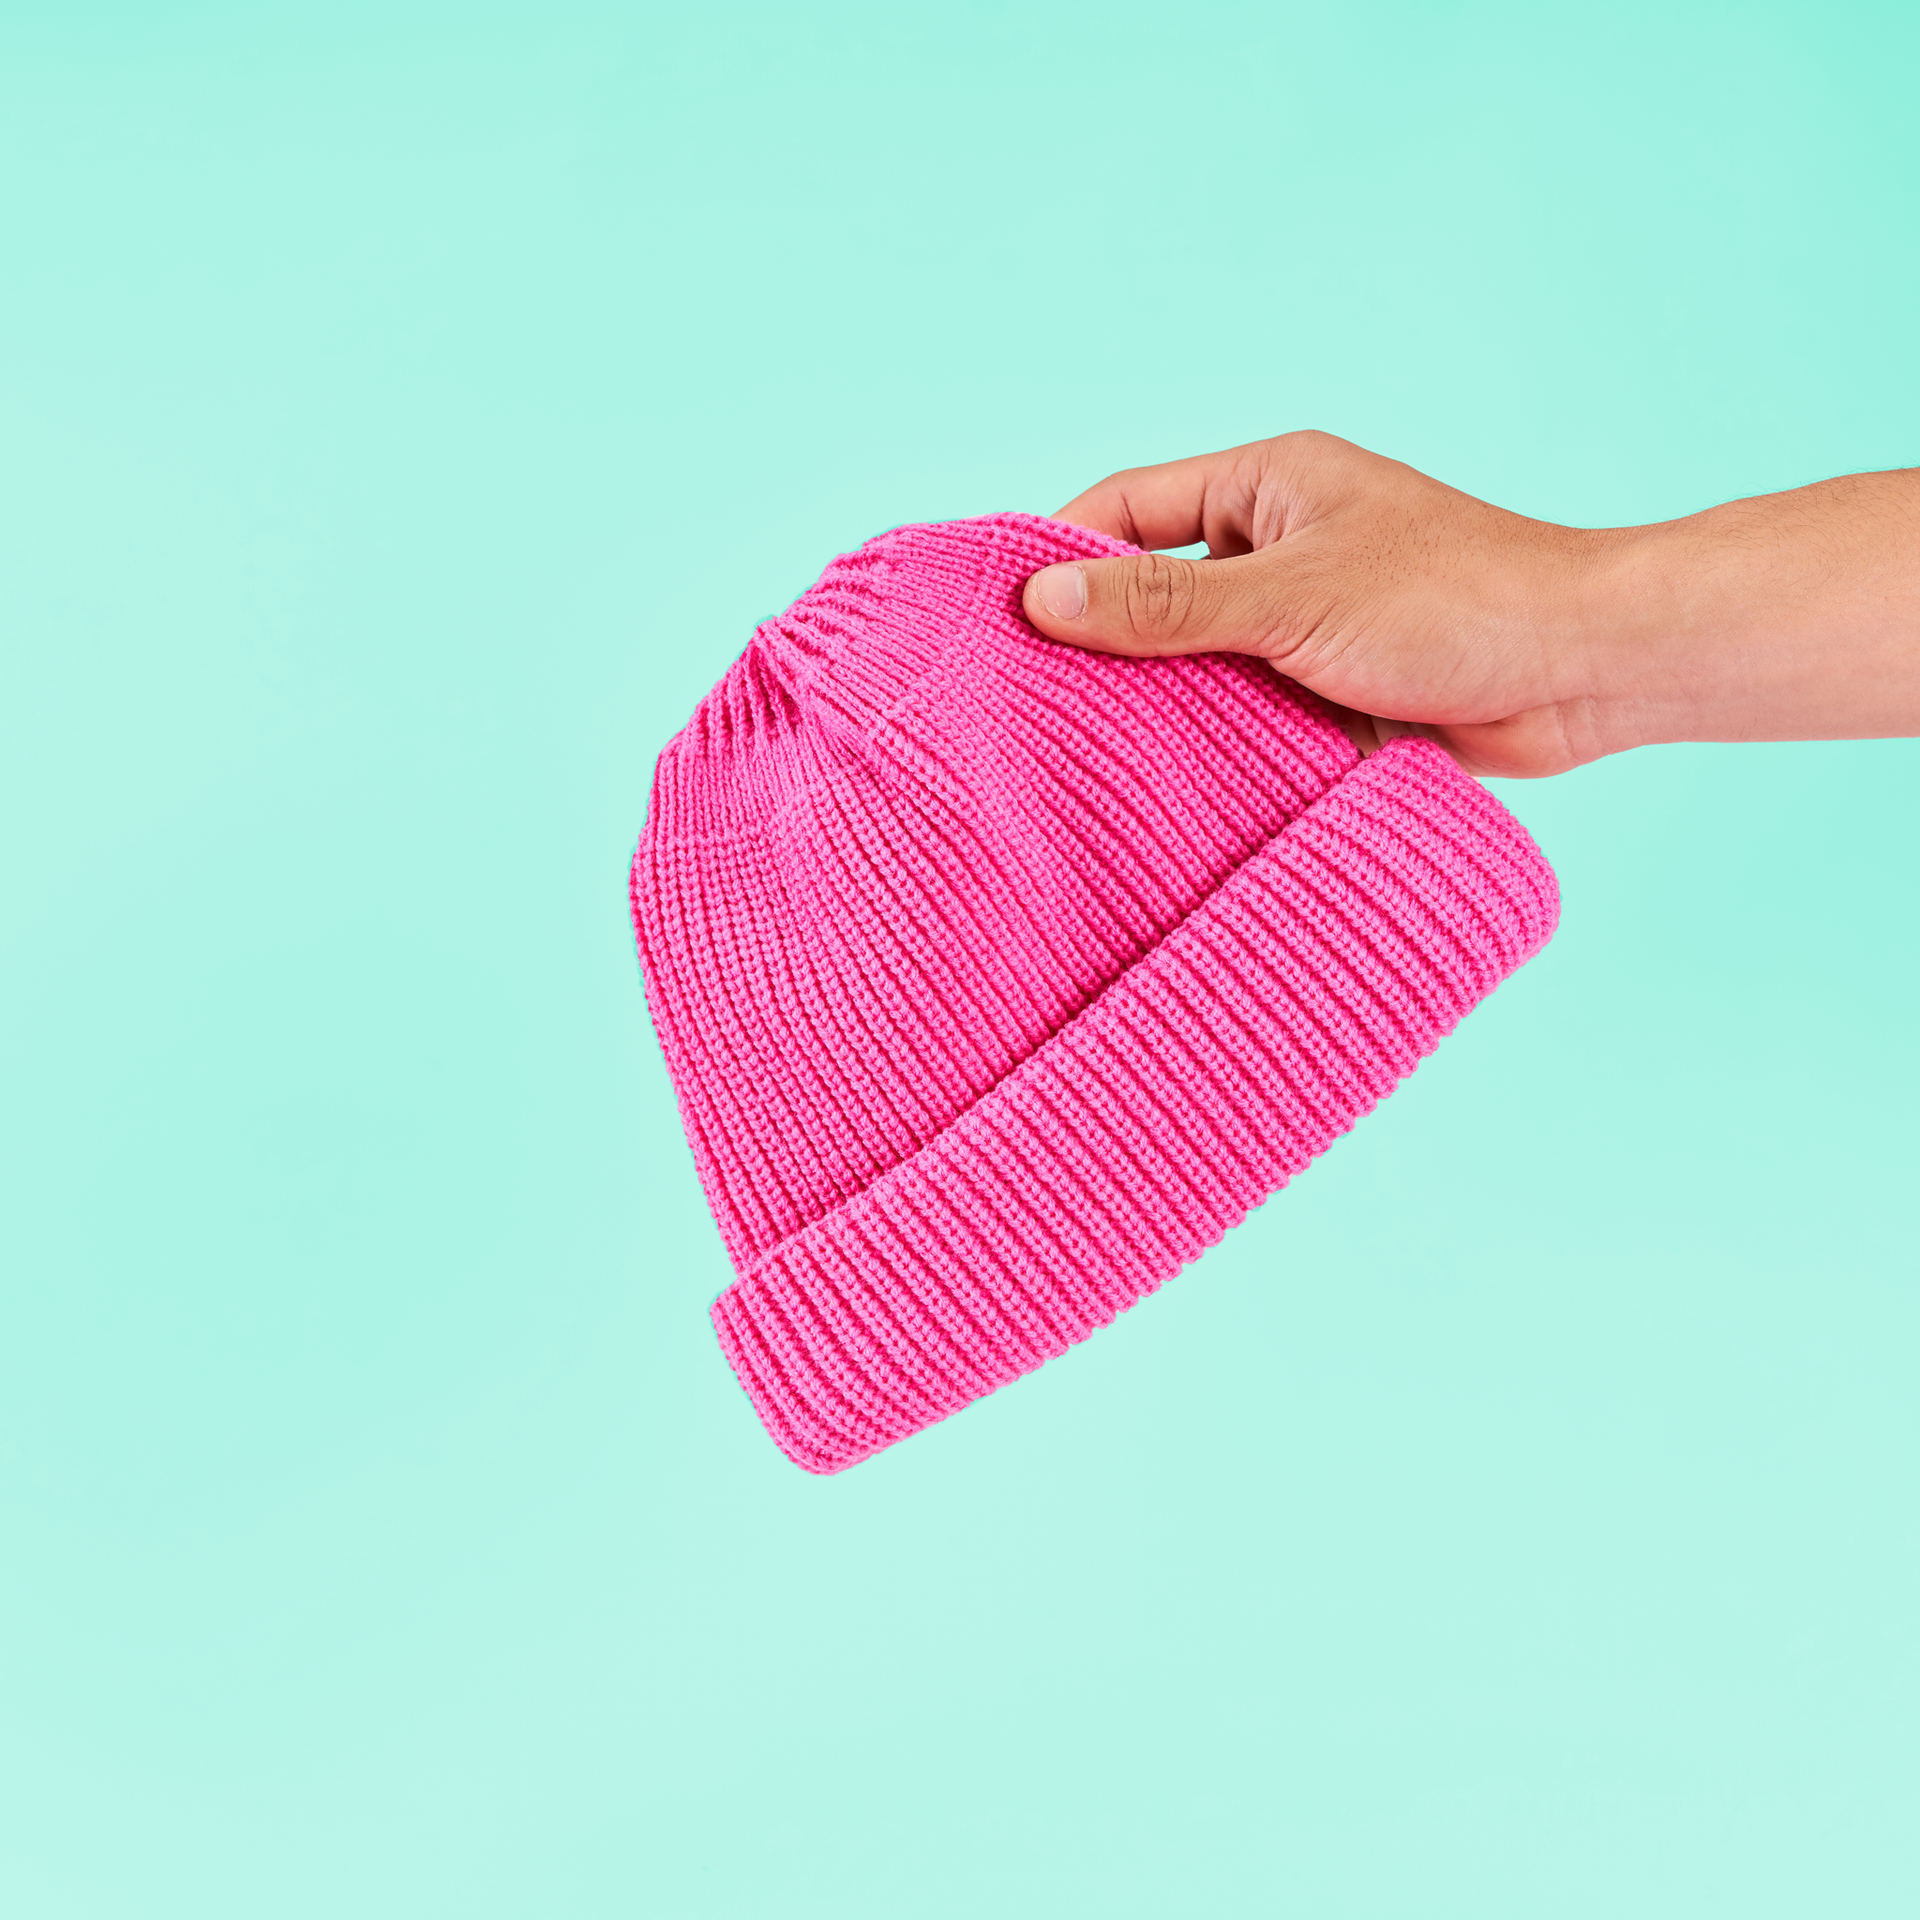 Lay Day Beanie - Hot Pink